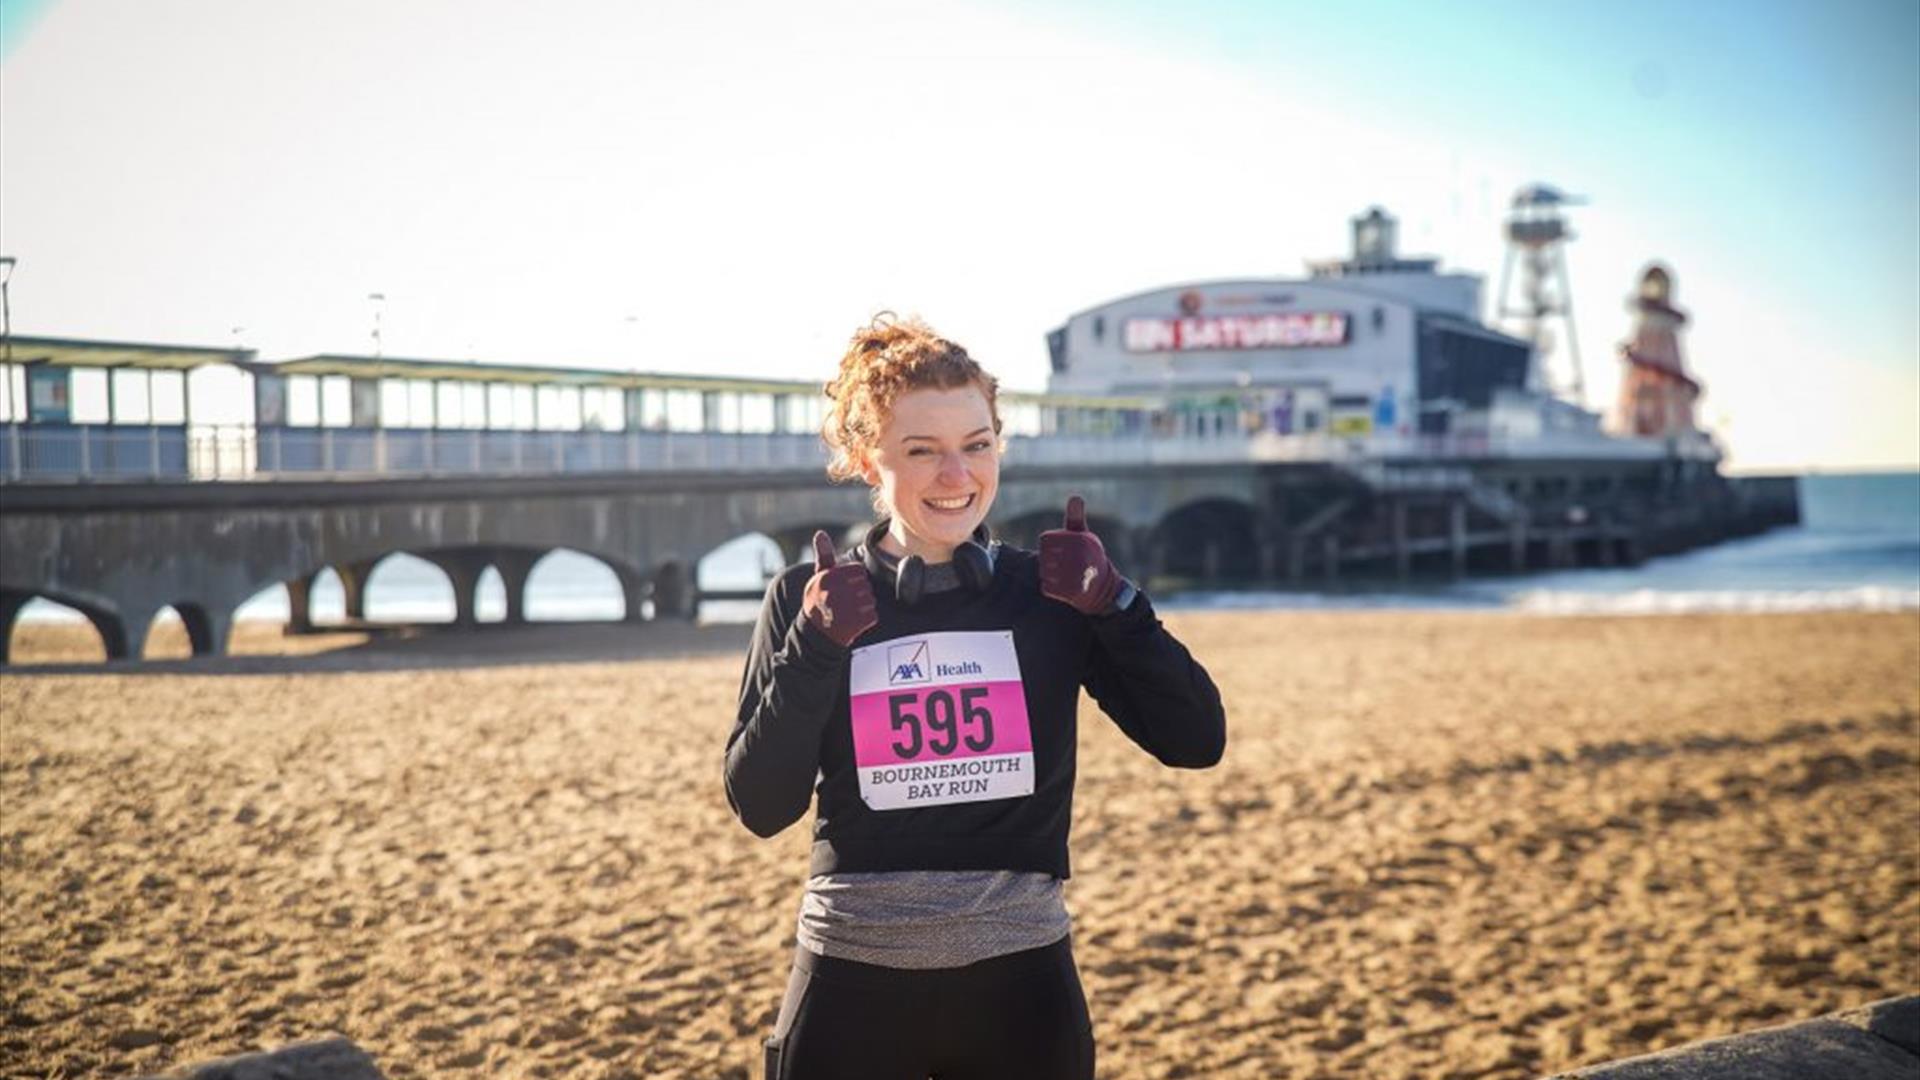 Woman runner with her thumbs up smiling at the camera next to Bournemouth beach